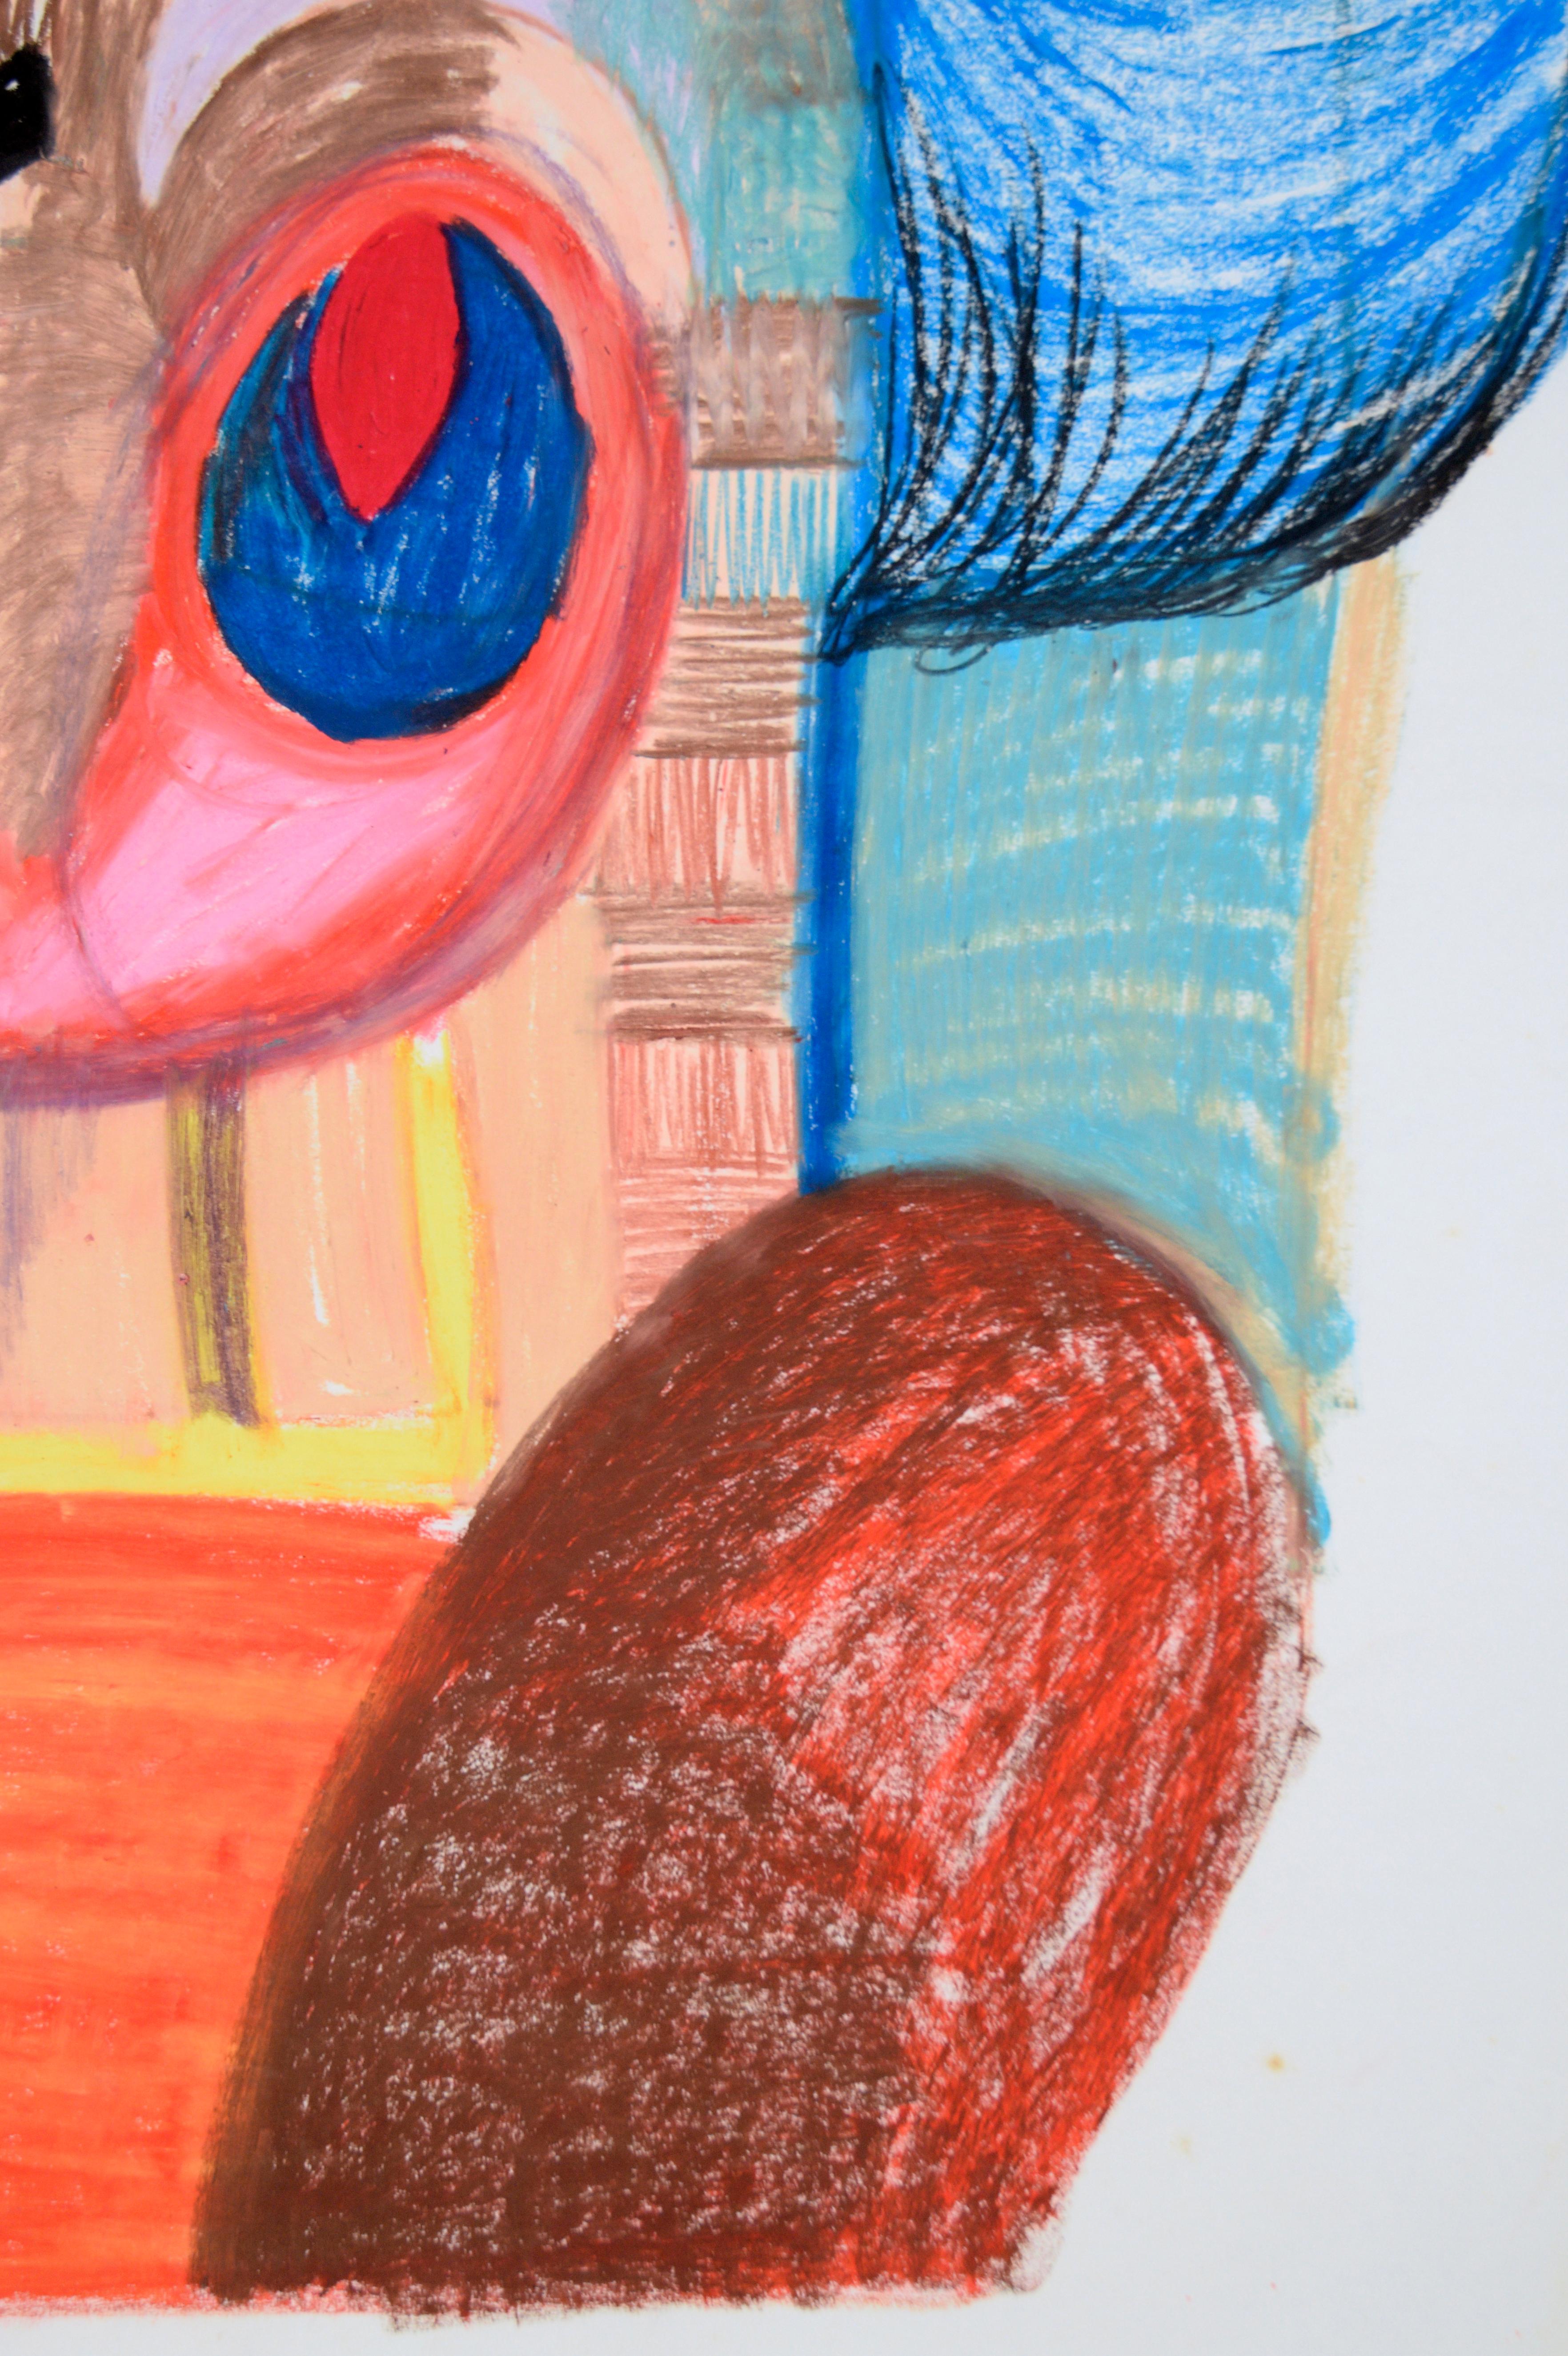 Abstracted Cubist Turkey Portrait in Pastel on Paper

Brightly colored abstract portrait by Michael William Eggleston (American, 20th Century). An abstracted figure is depicted as having a turkey-like face and tail feathers with obscured features.